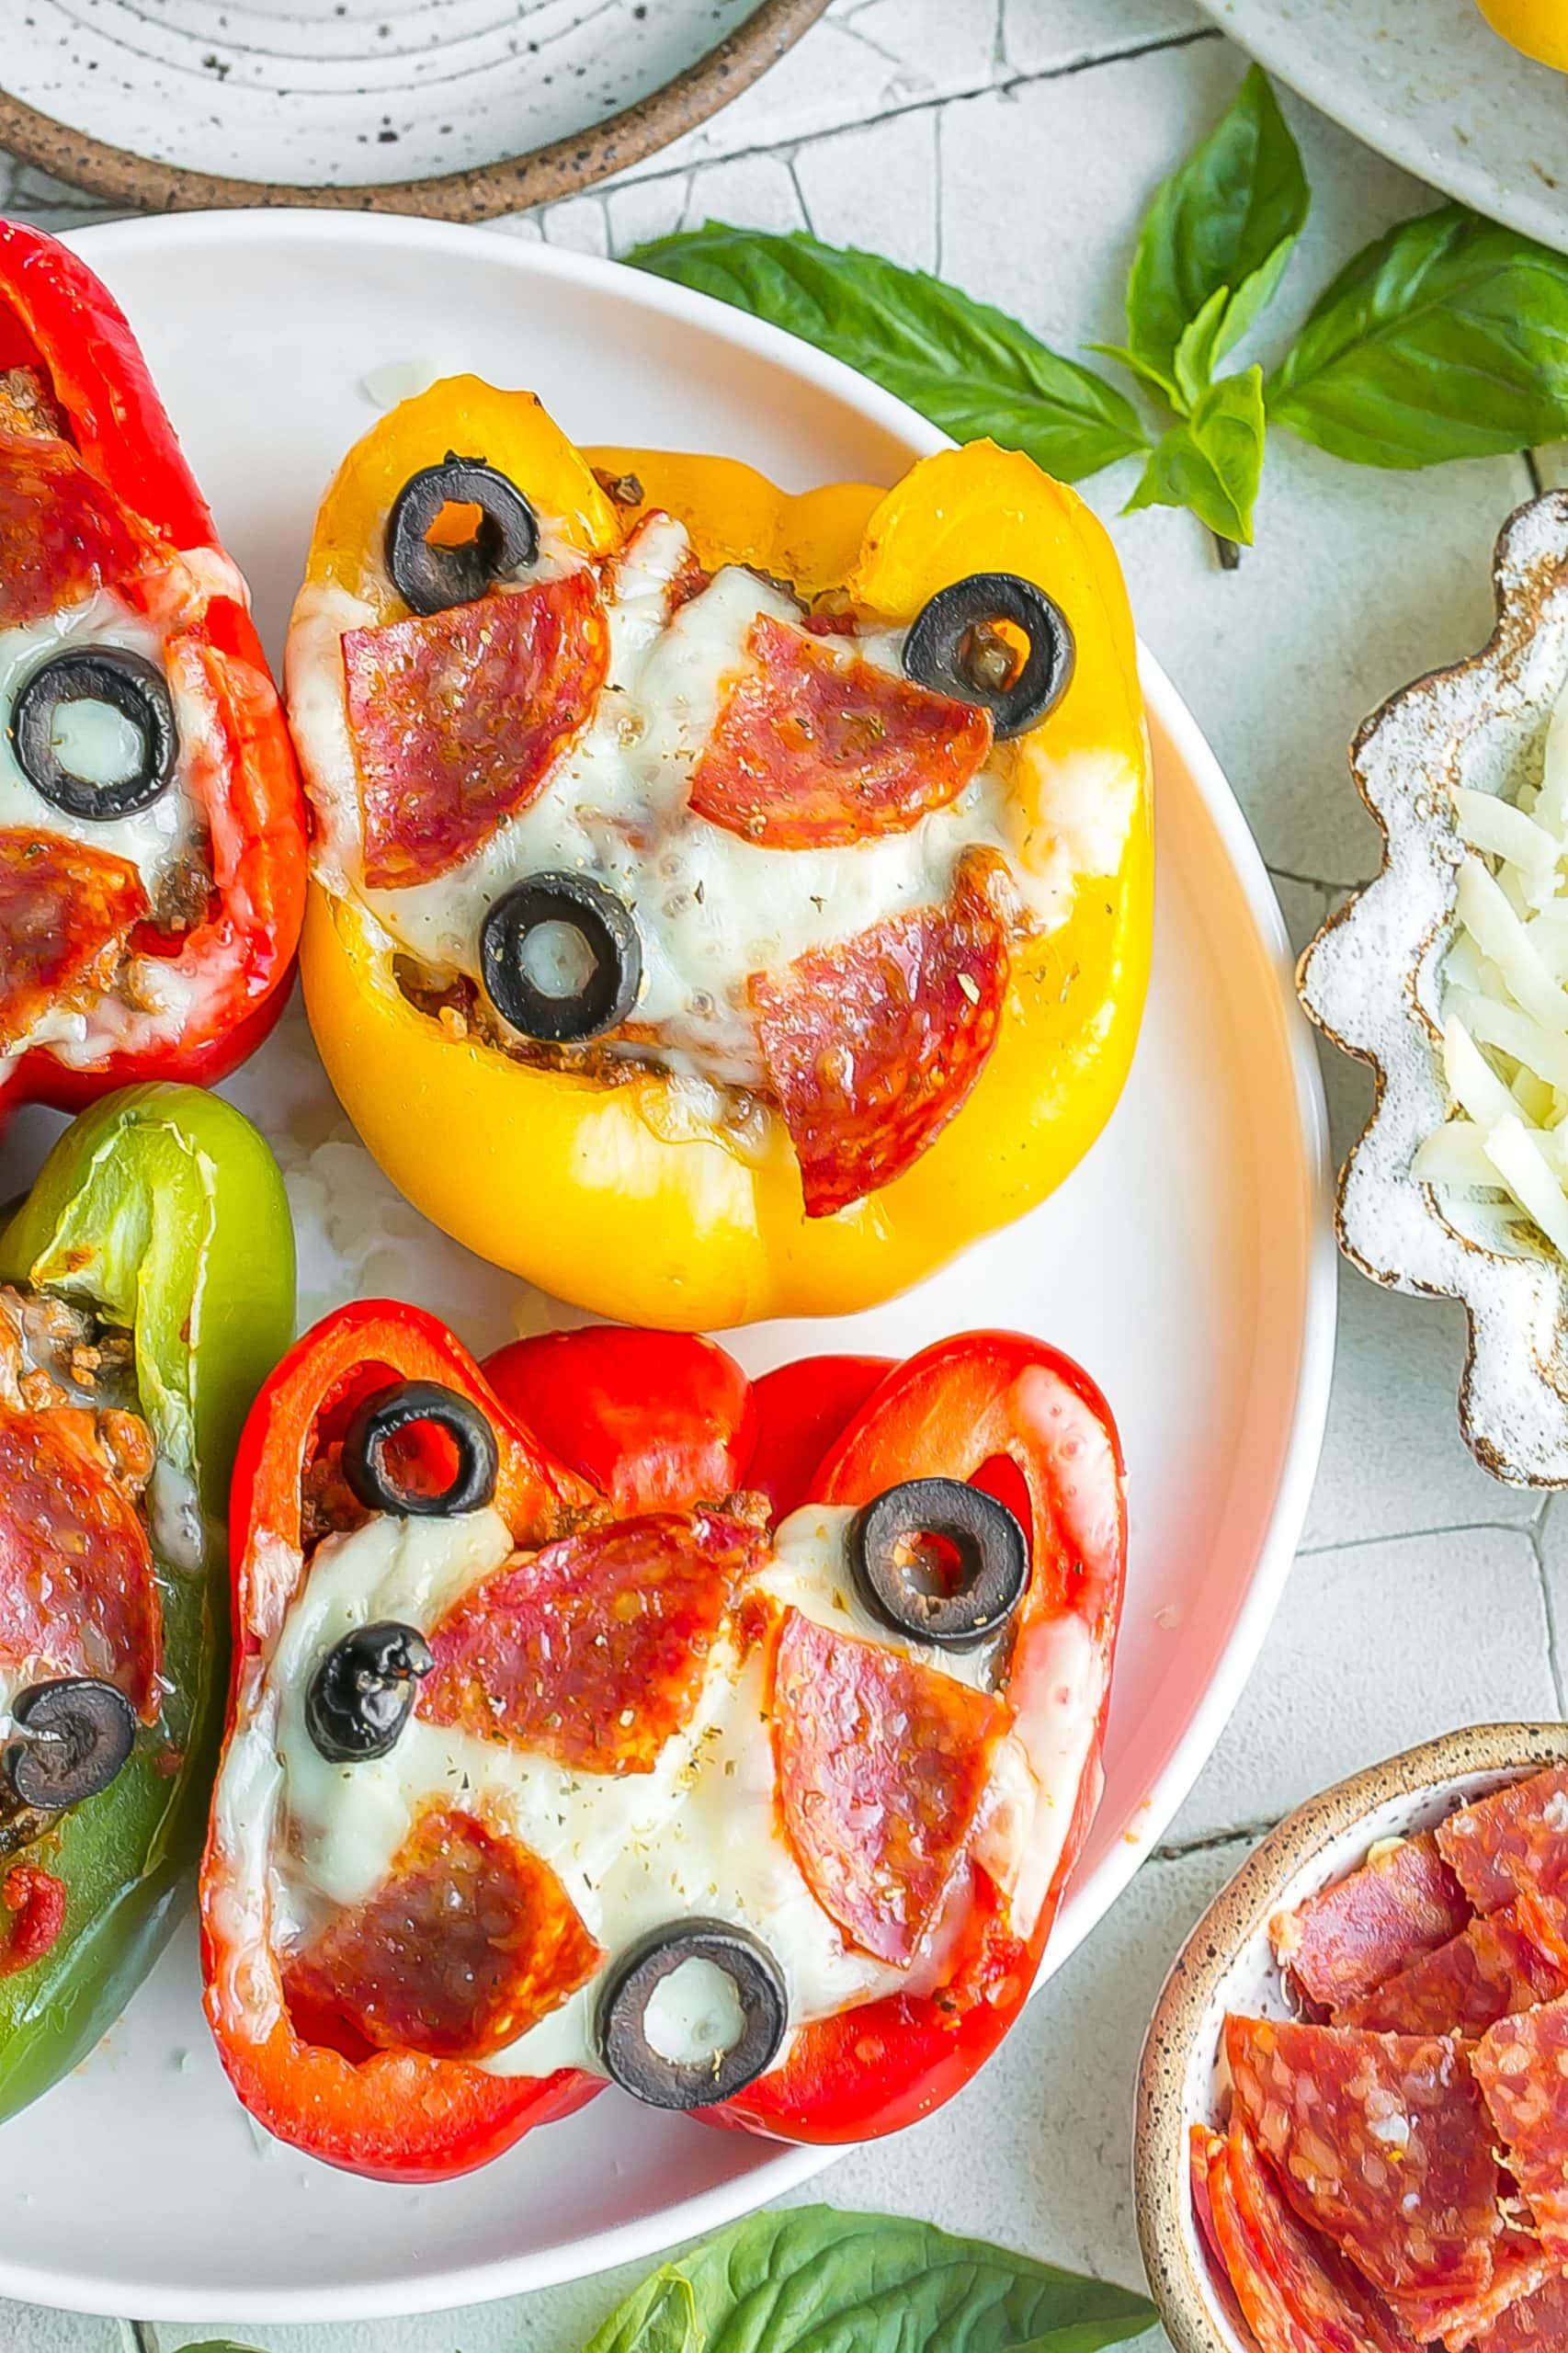 Pepperoni, olive and cheese stuffed bell peppers on a plate.